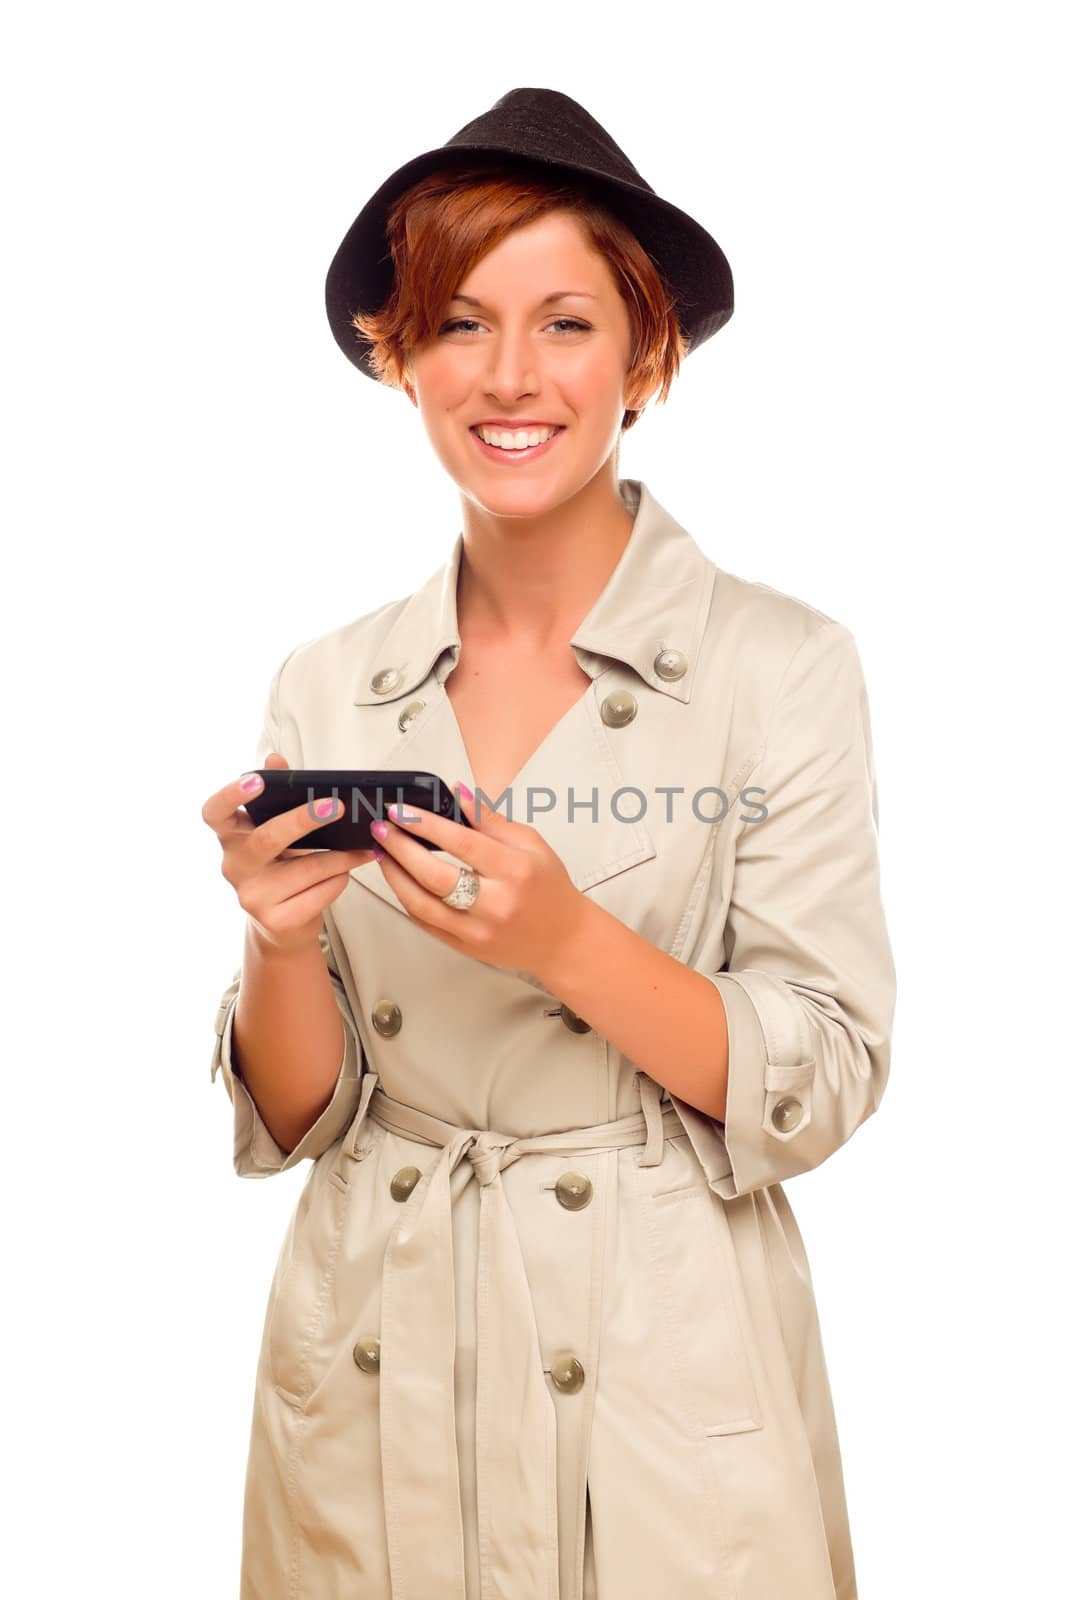 Smiling Young Woman Holding Smart Cell Phone Isolated on a White Background.